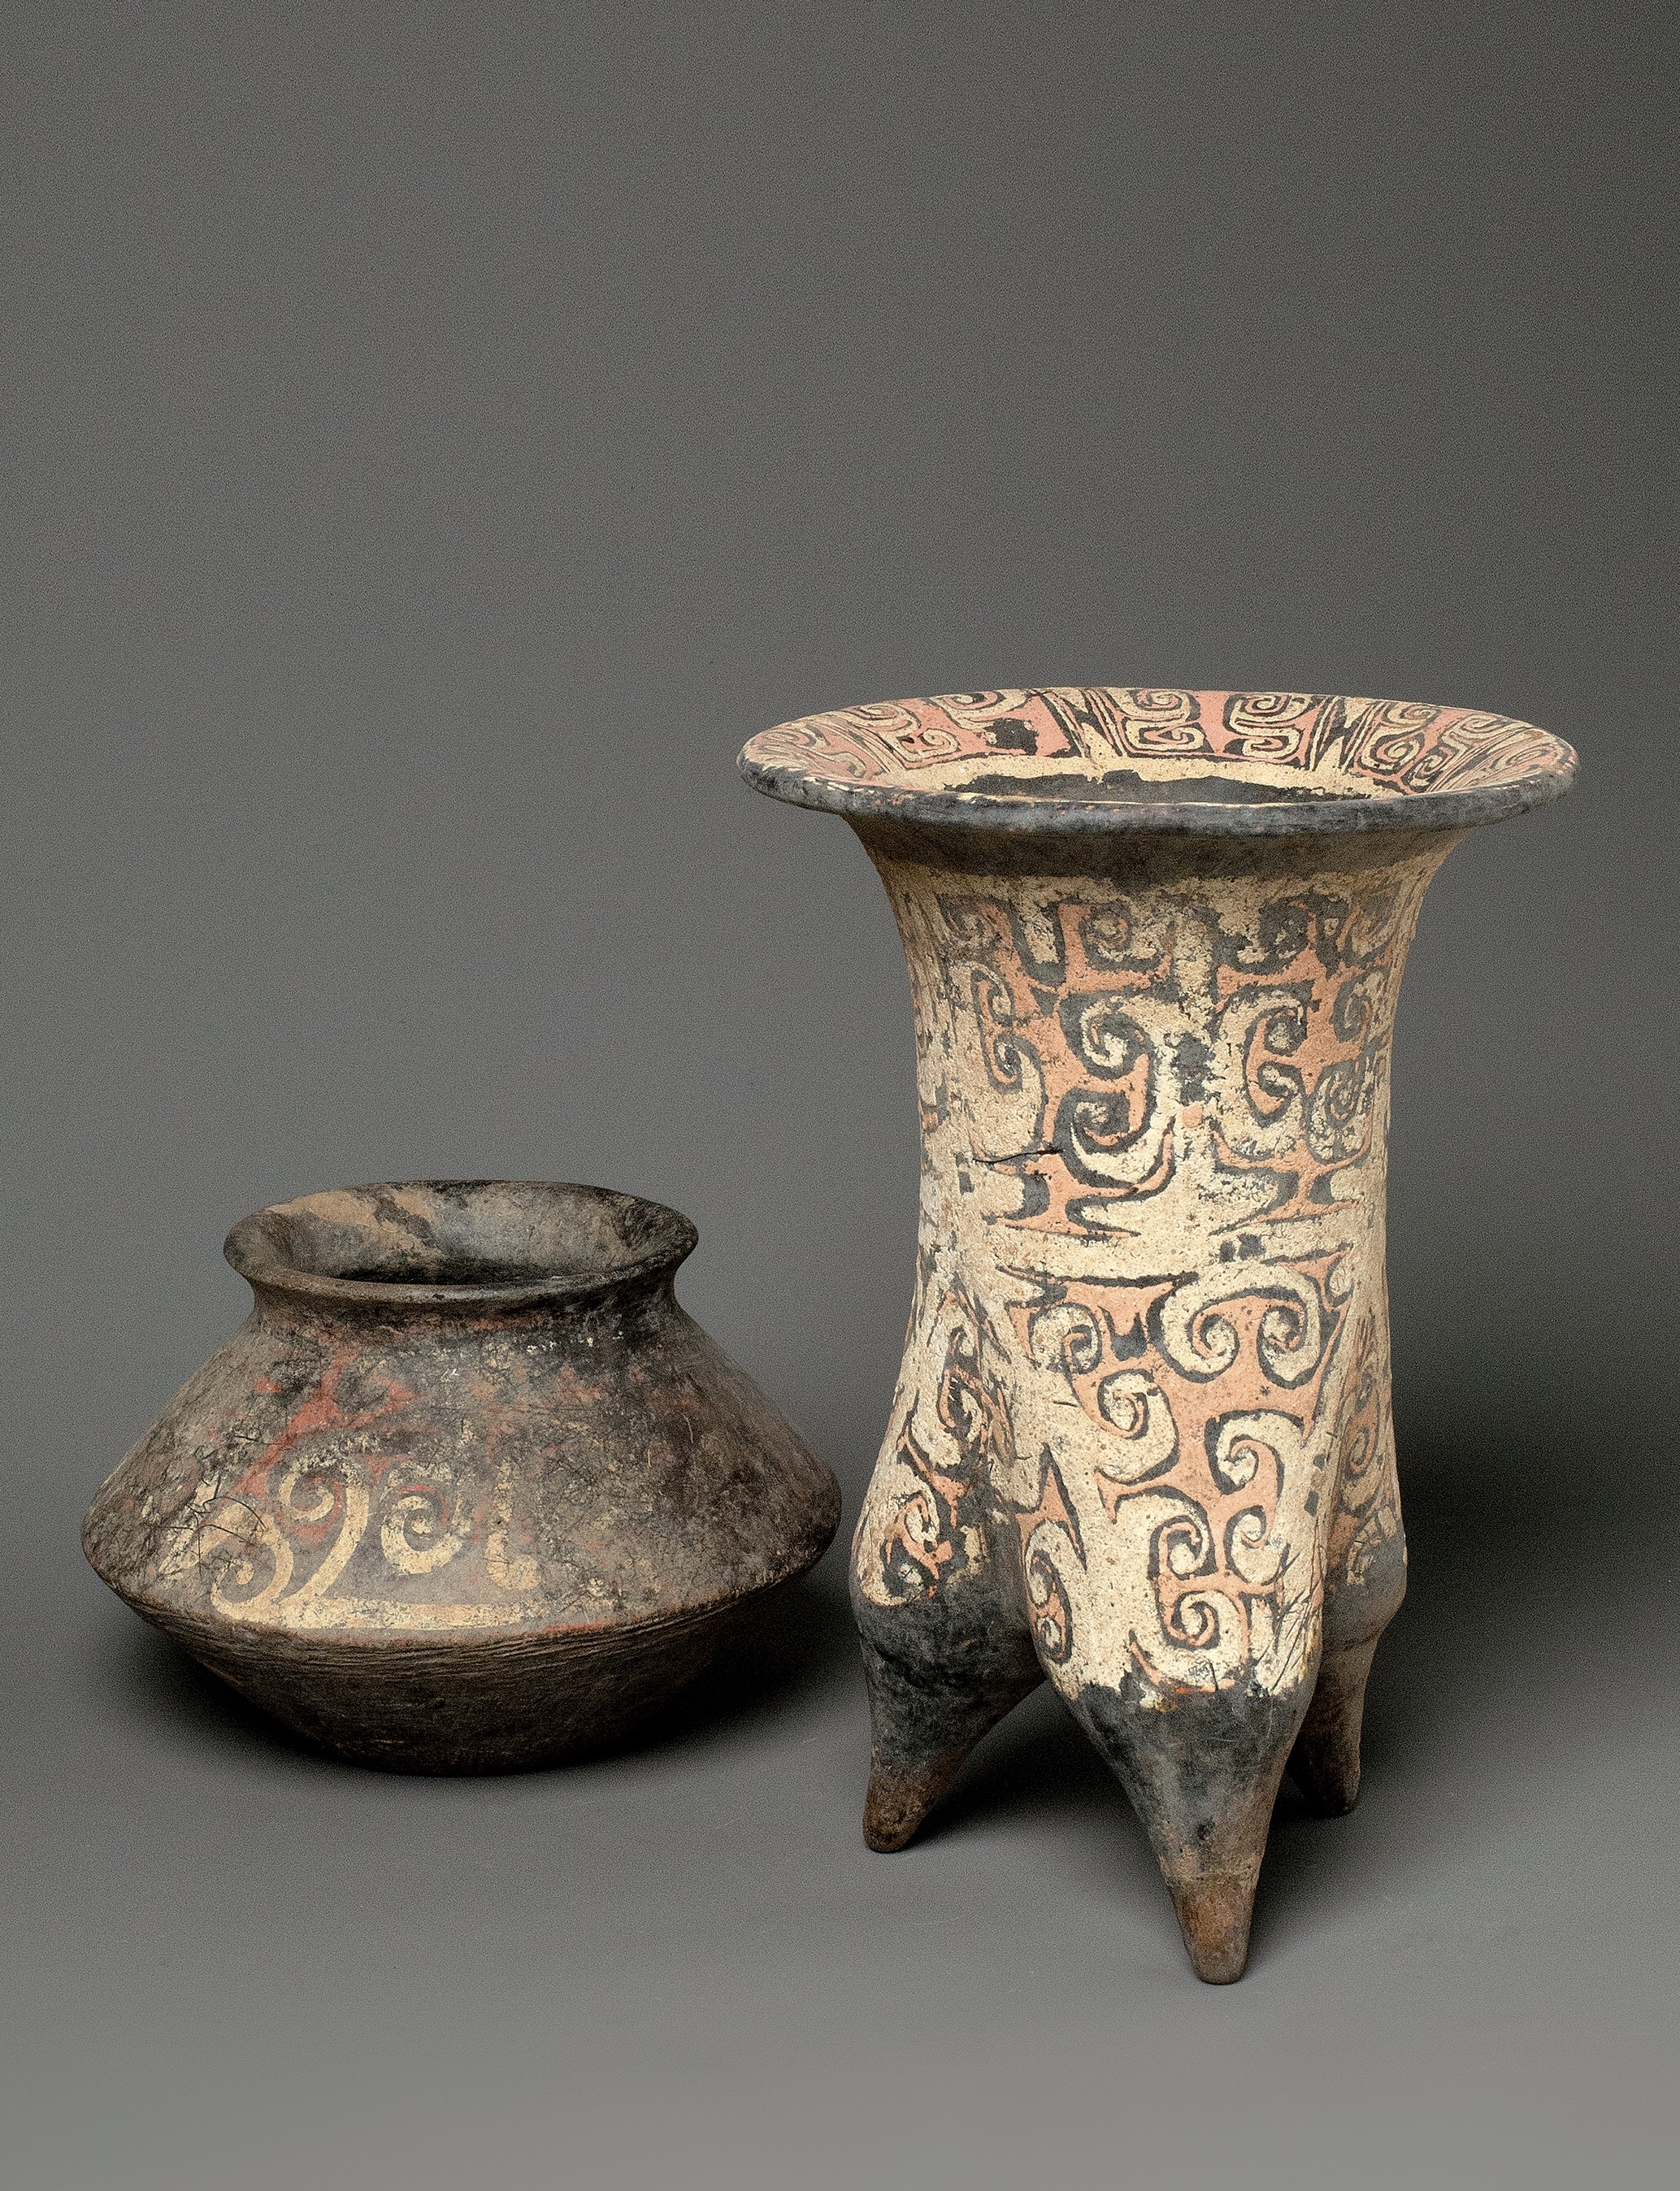 A Group Of Painted Black Pottery Ware, Lower Xiajiadian Culture (2300-1600 Bc)